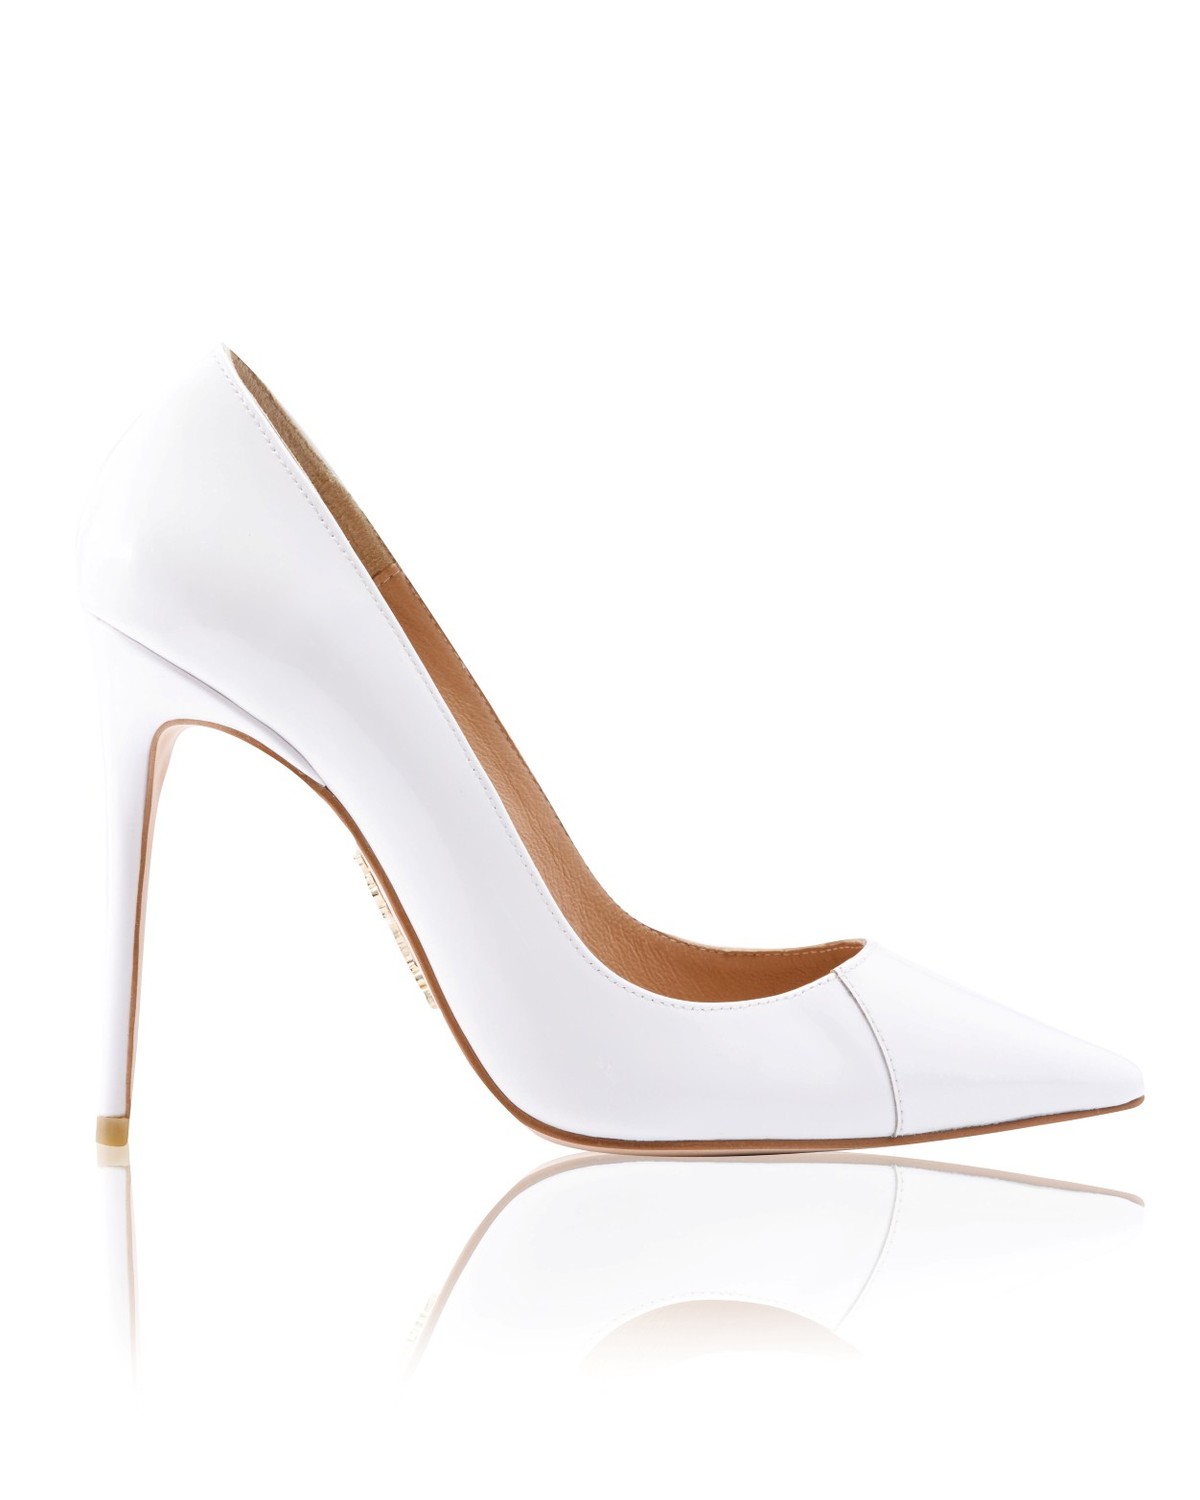 'PARIS' 4' White Patent Leather Pointy Toe Heels